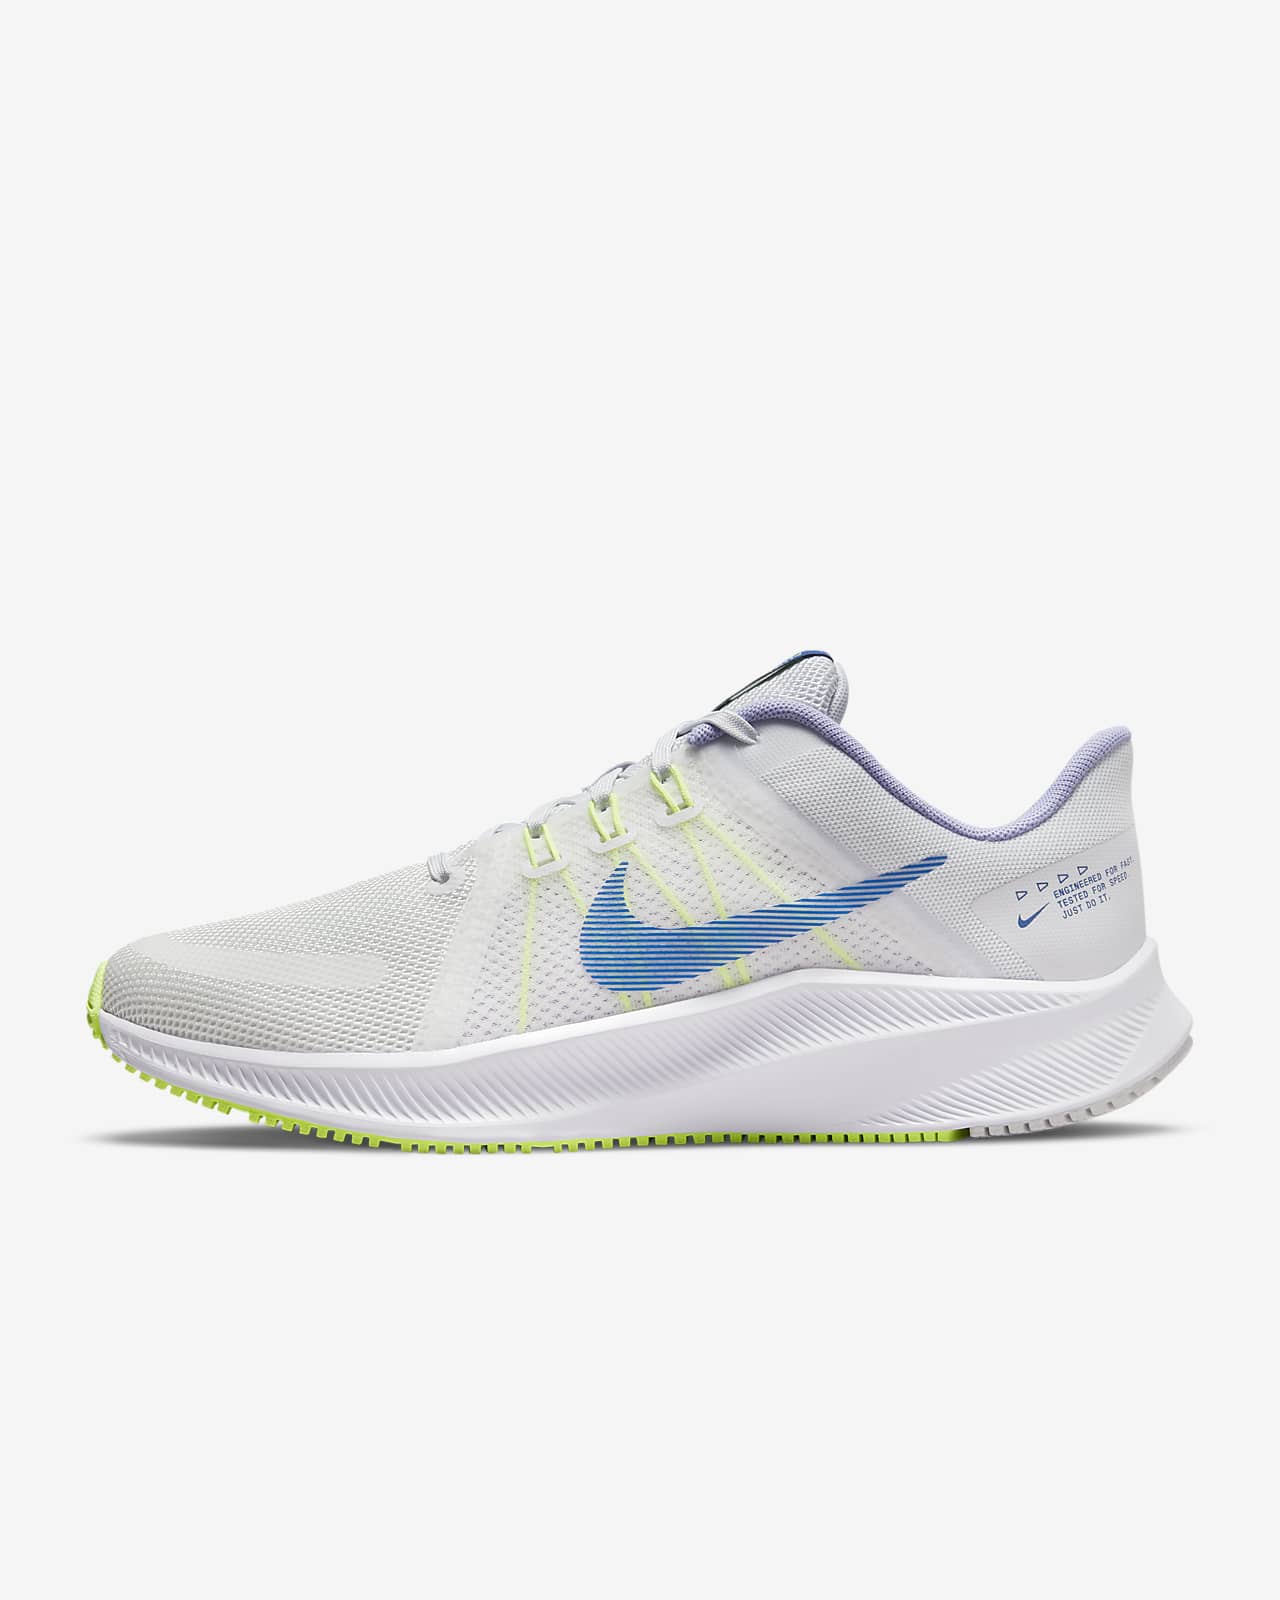 Nike Quest 4 Women's Road Running Shoes.